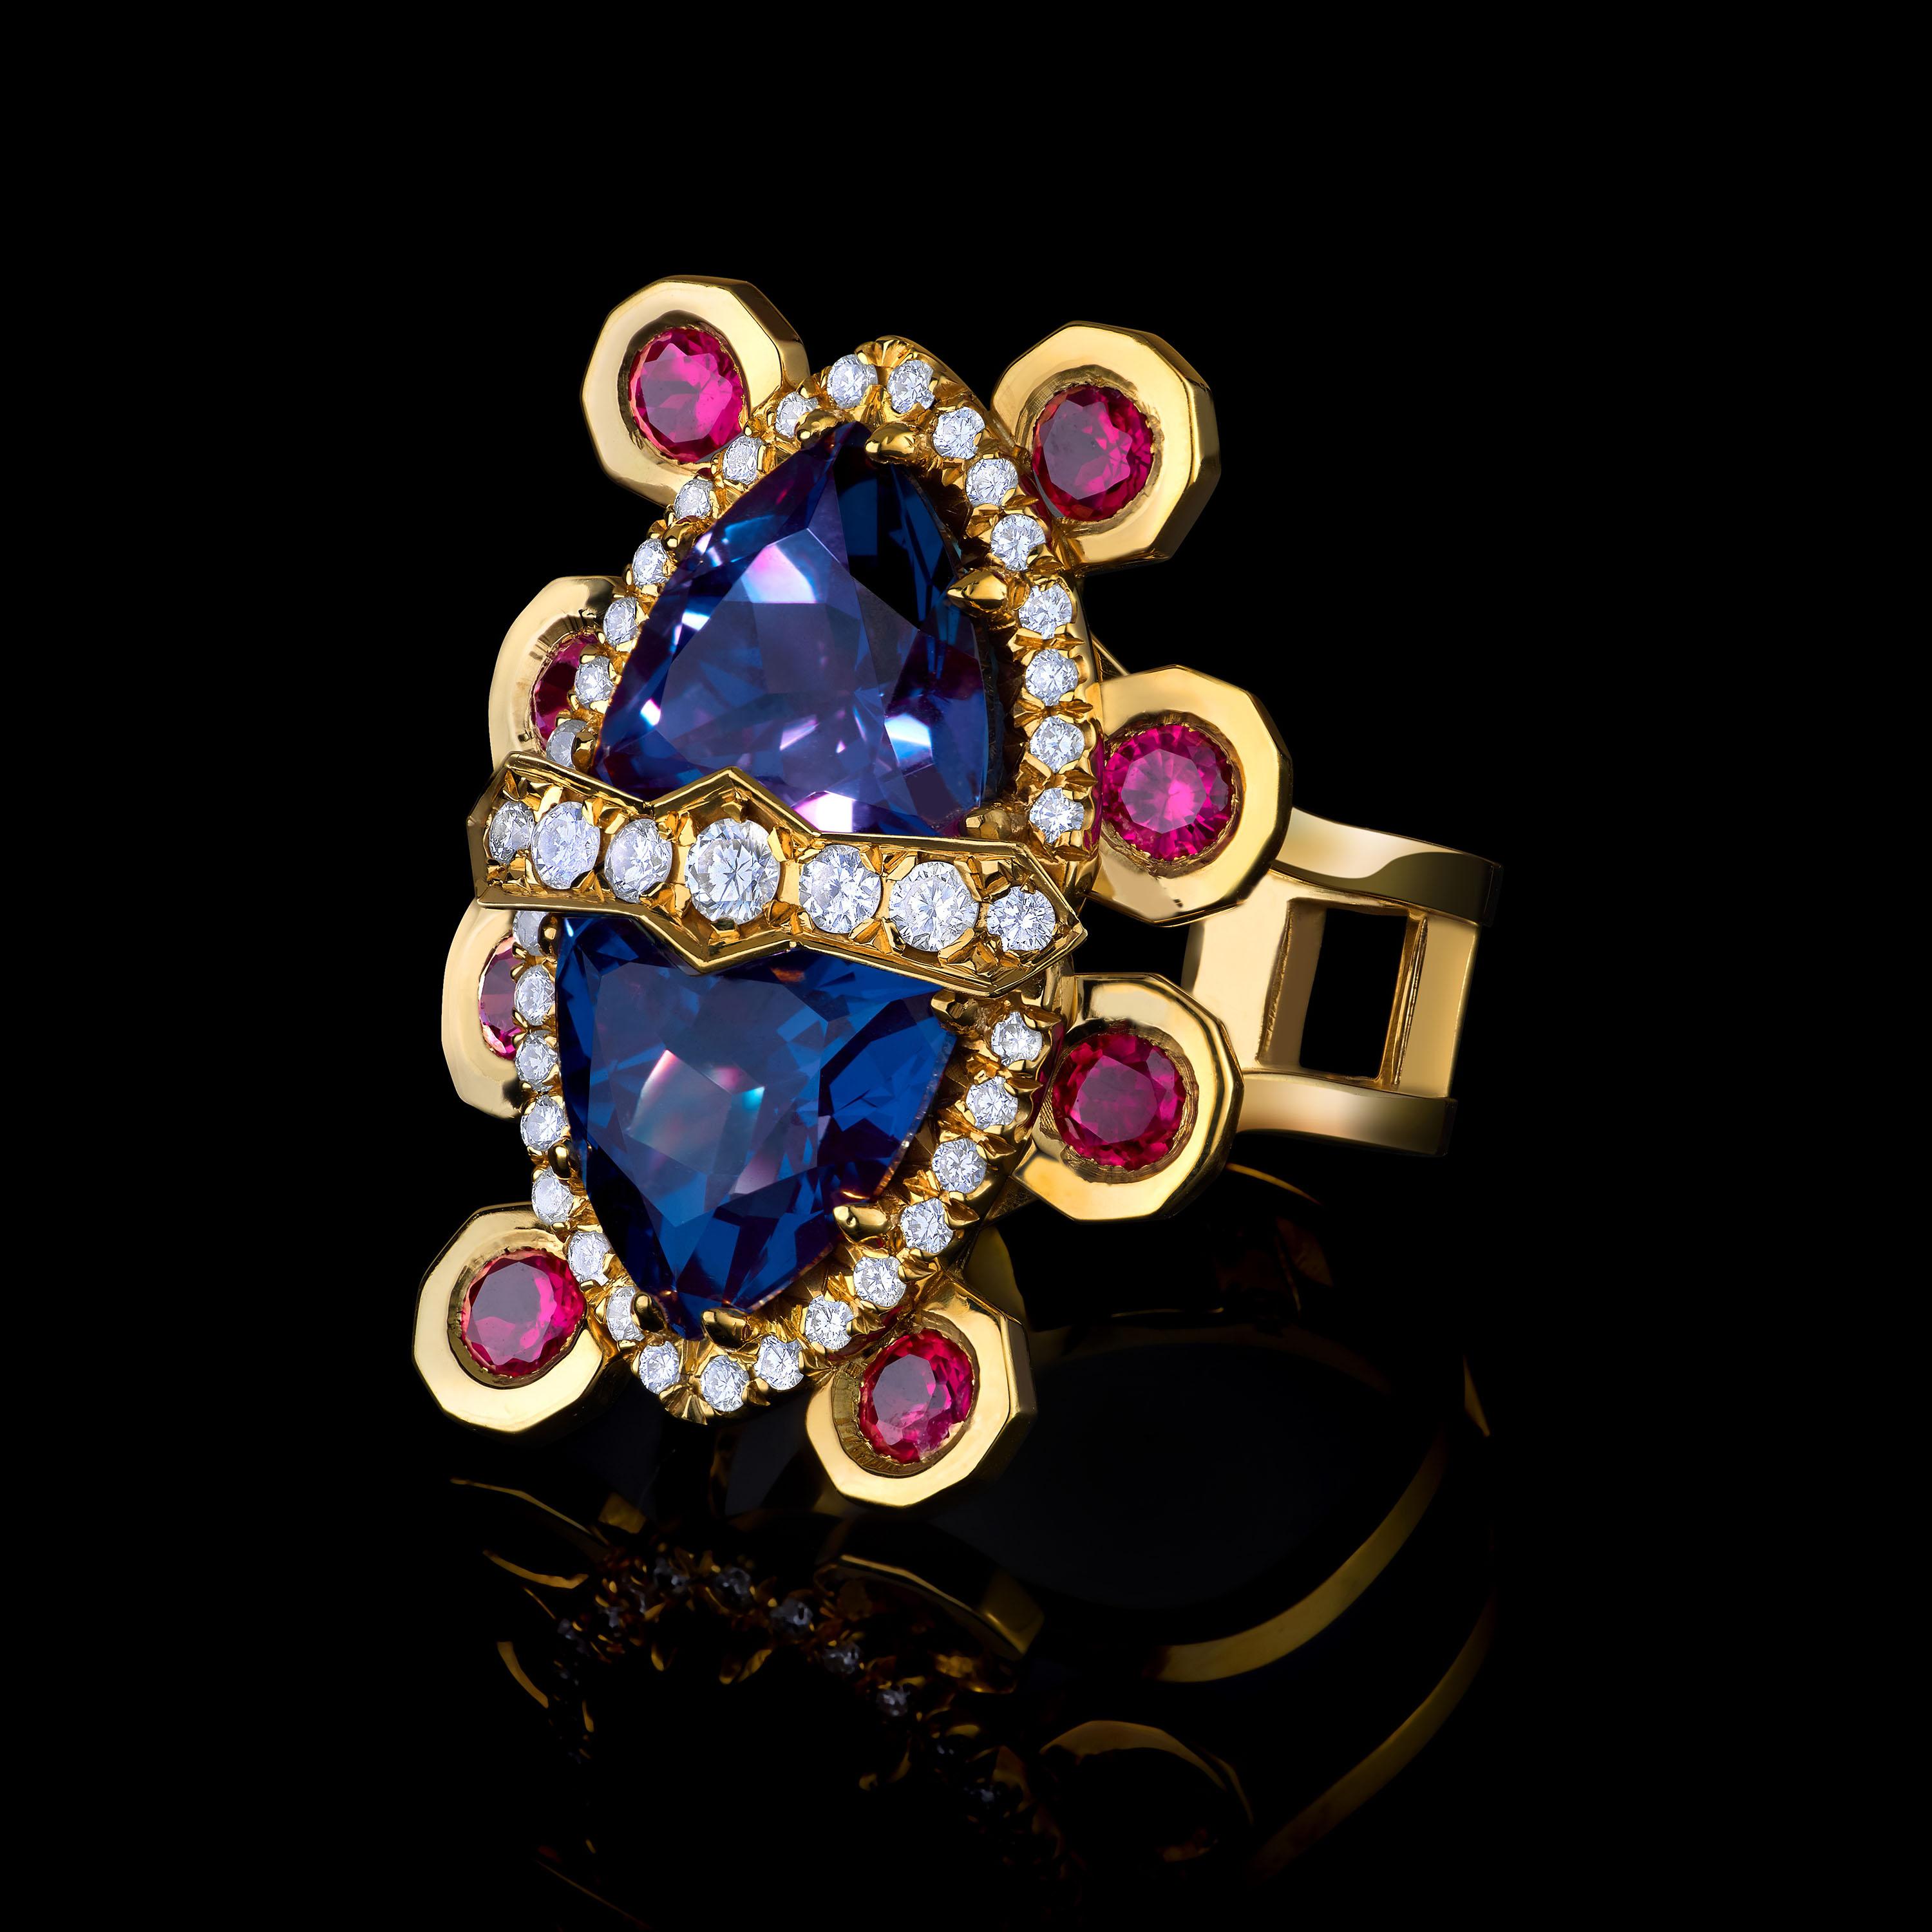 Algu ring in 18K gold featuring two colour changing Alexandrites (7.85ctw), diamonds (0.31ctw), and rubies (1.2ctw).

Algu is a Saami (Northern Swedish) word for creation. The ring is an homage to the creation myth of the Northern people of Europe.